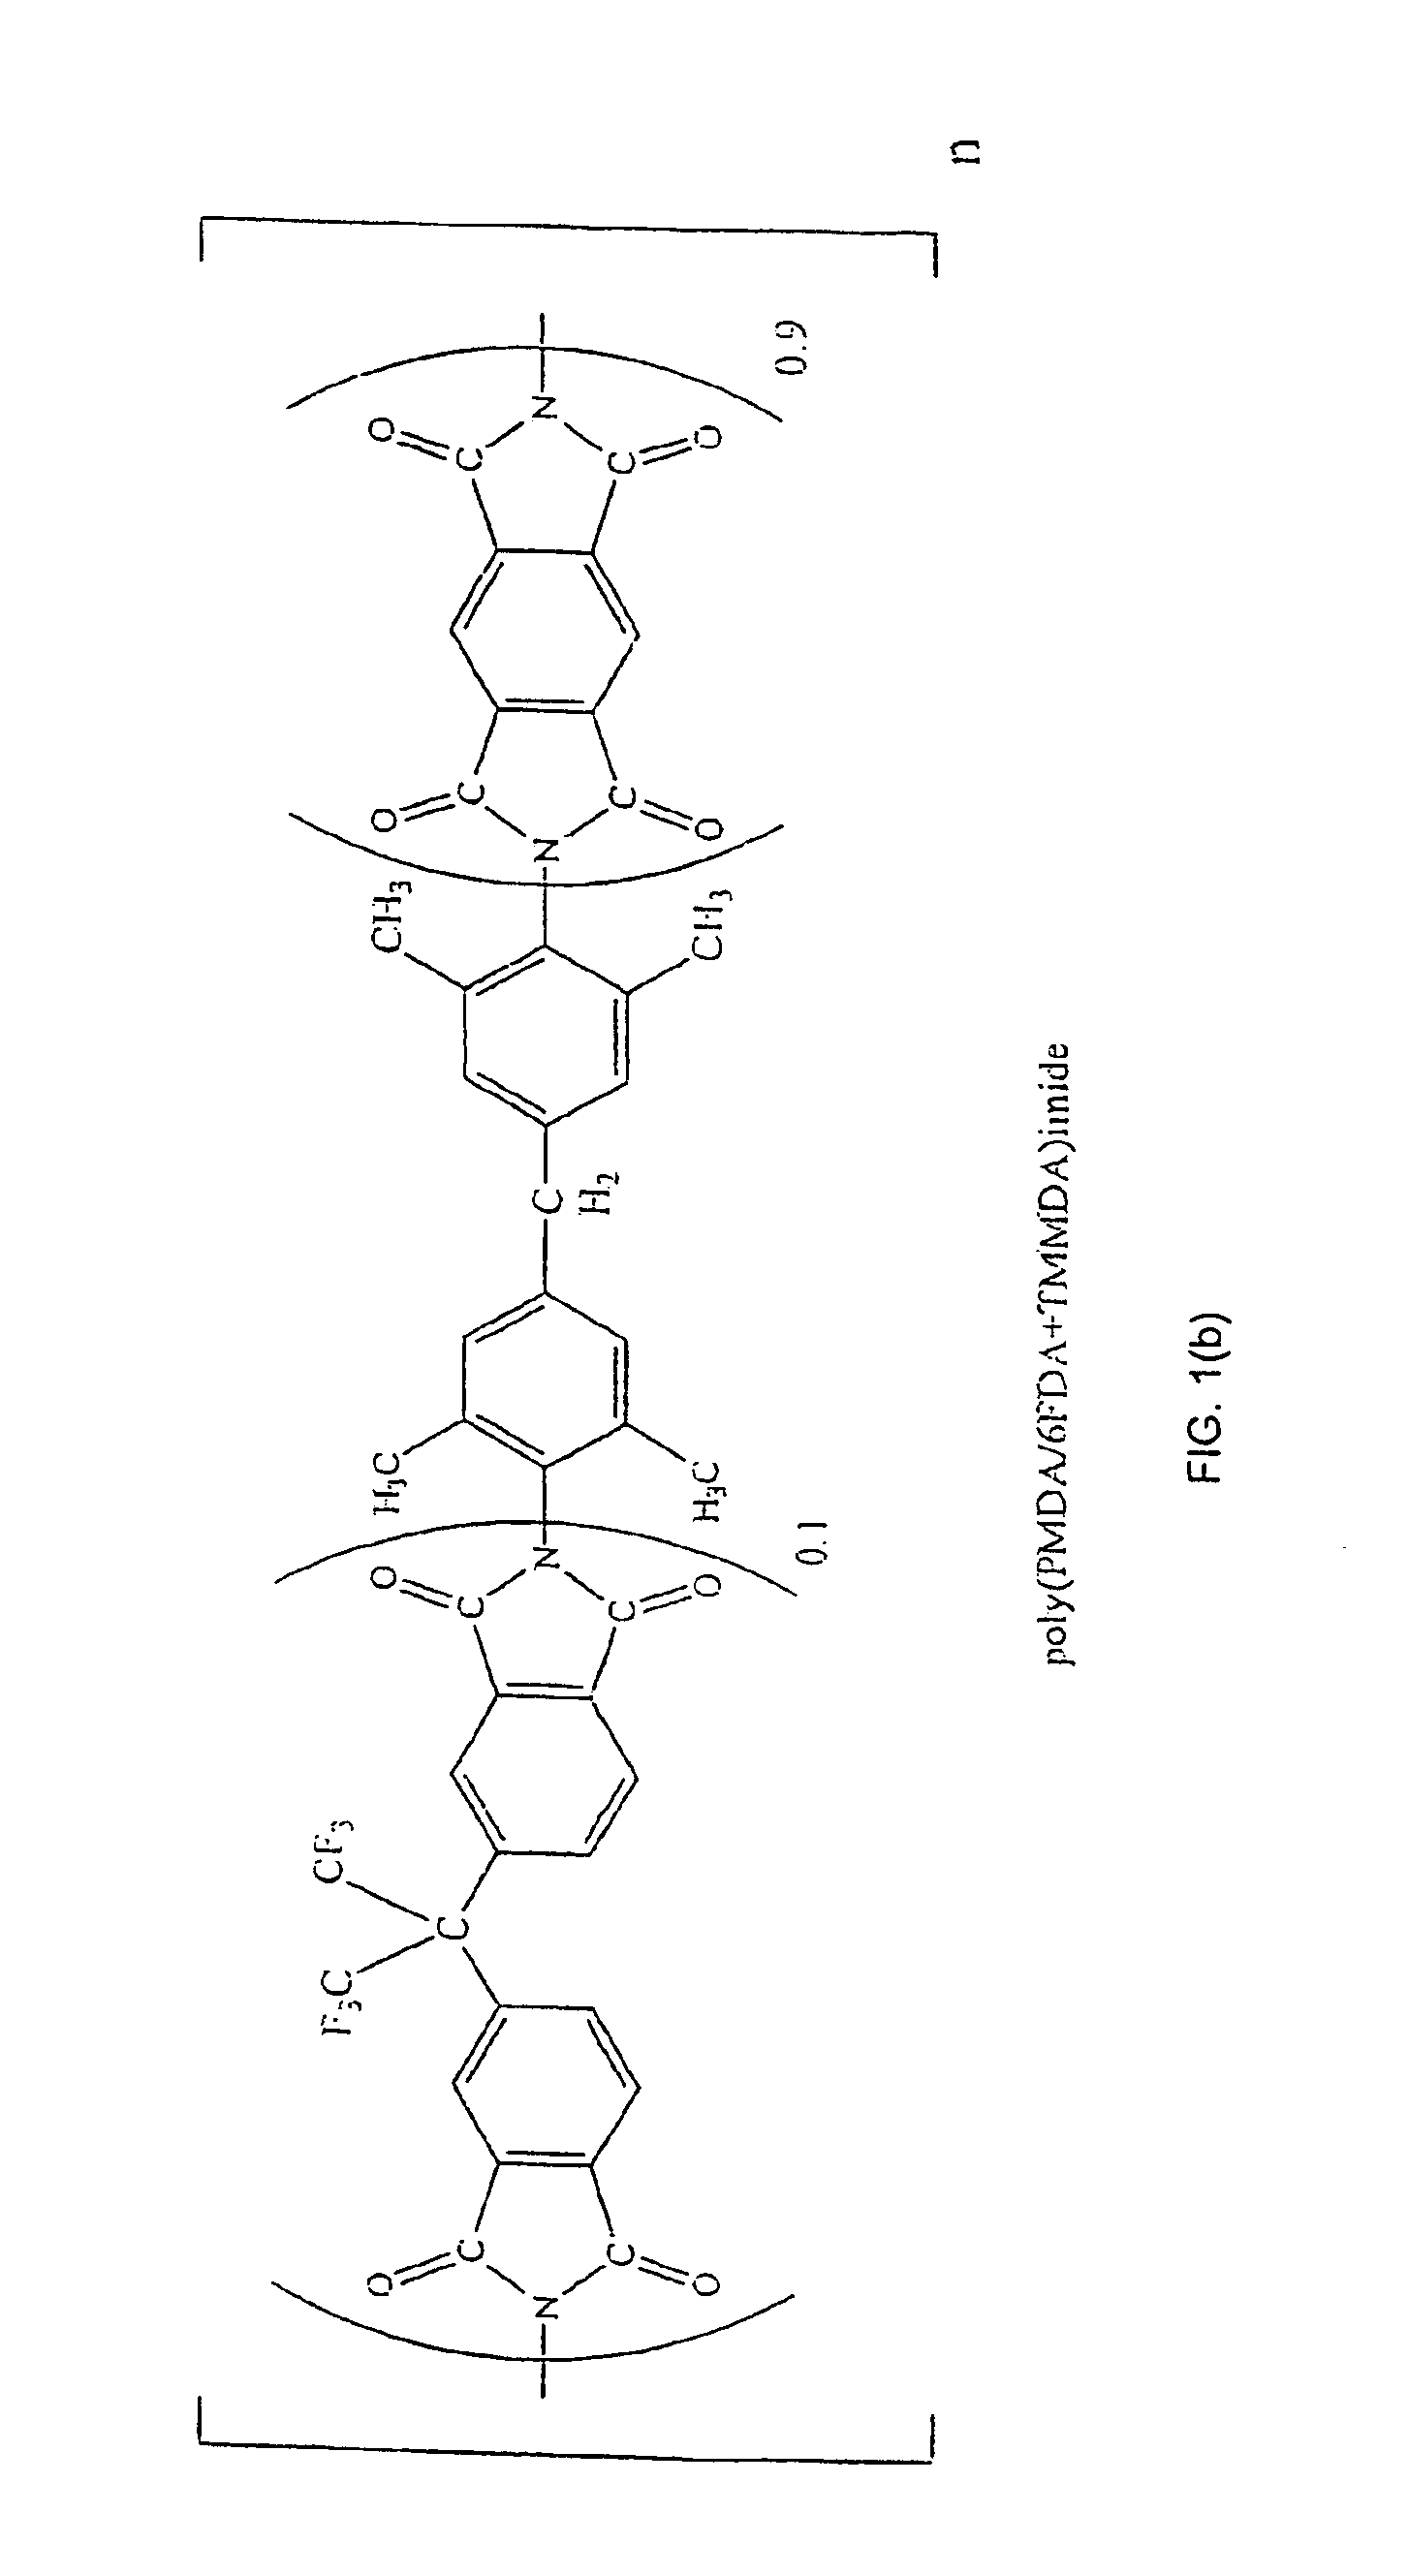 Card with embedded IC and electrochemical cell